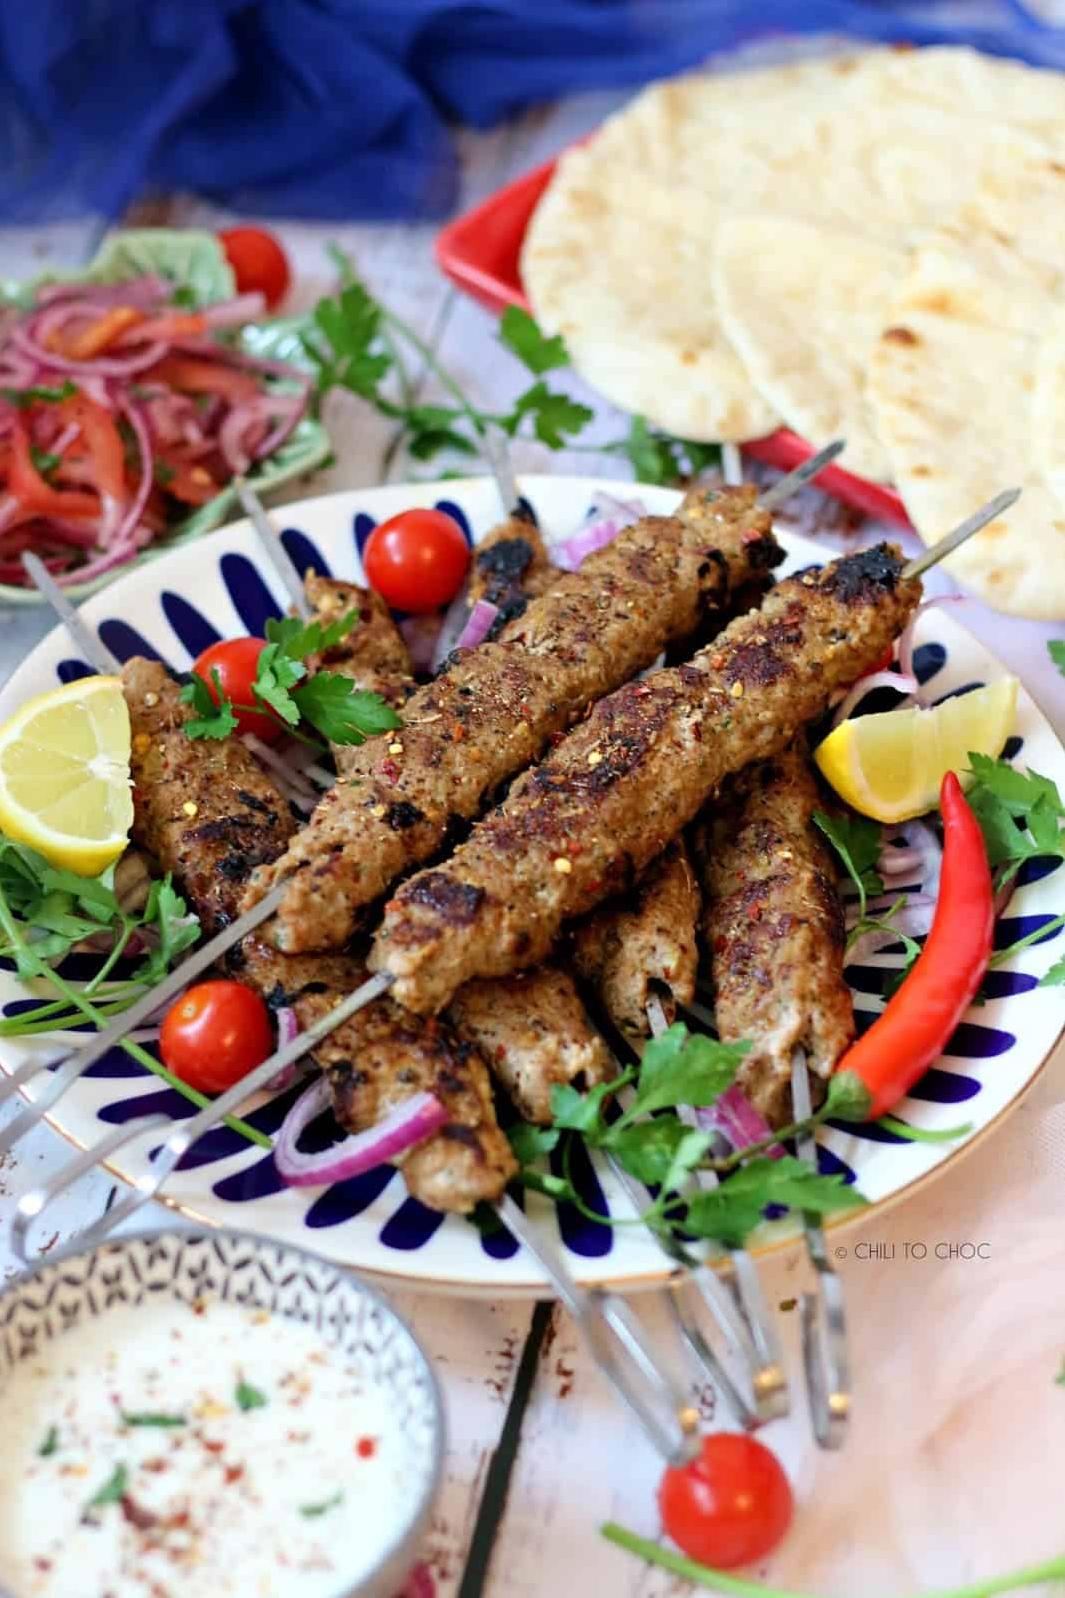  Take your taste buds on a trip to Istanbul with this authentic Turkish marinade recipe.